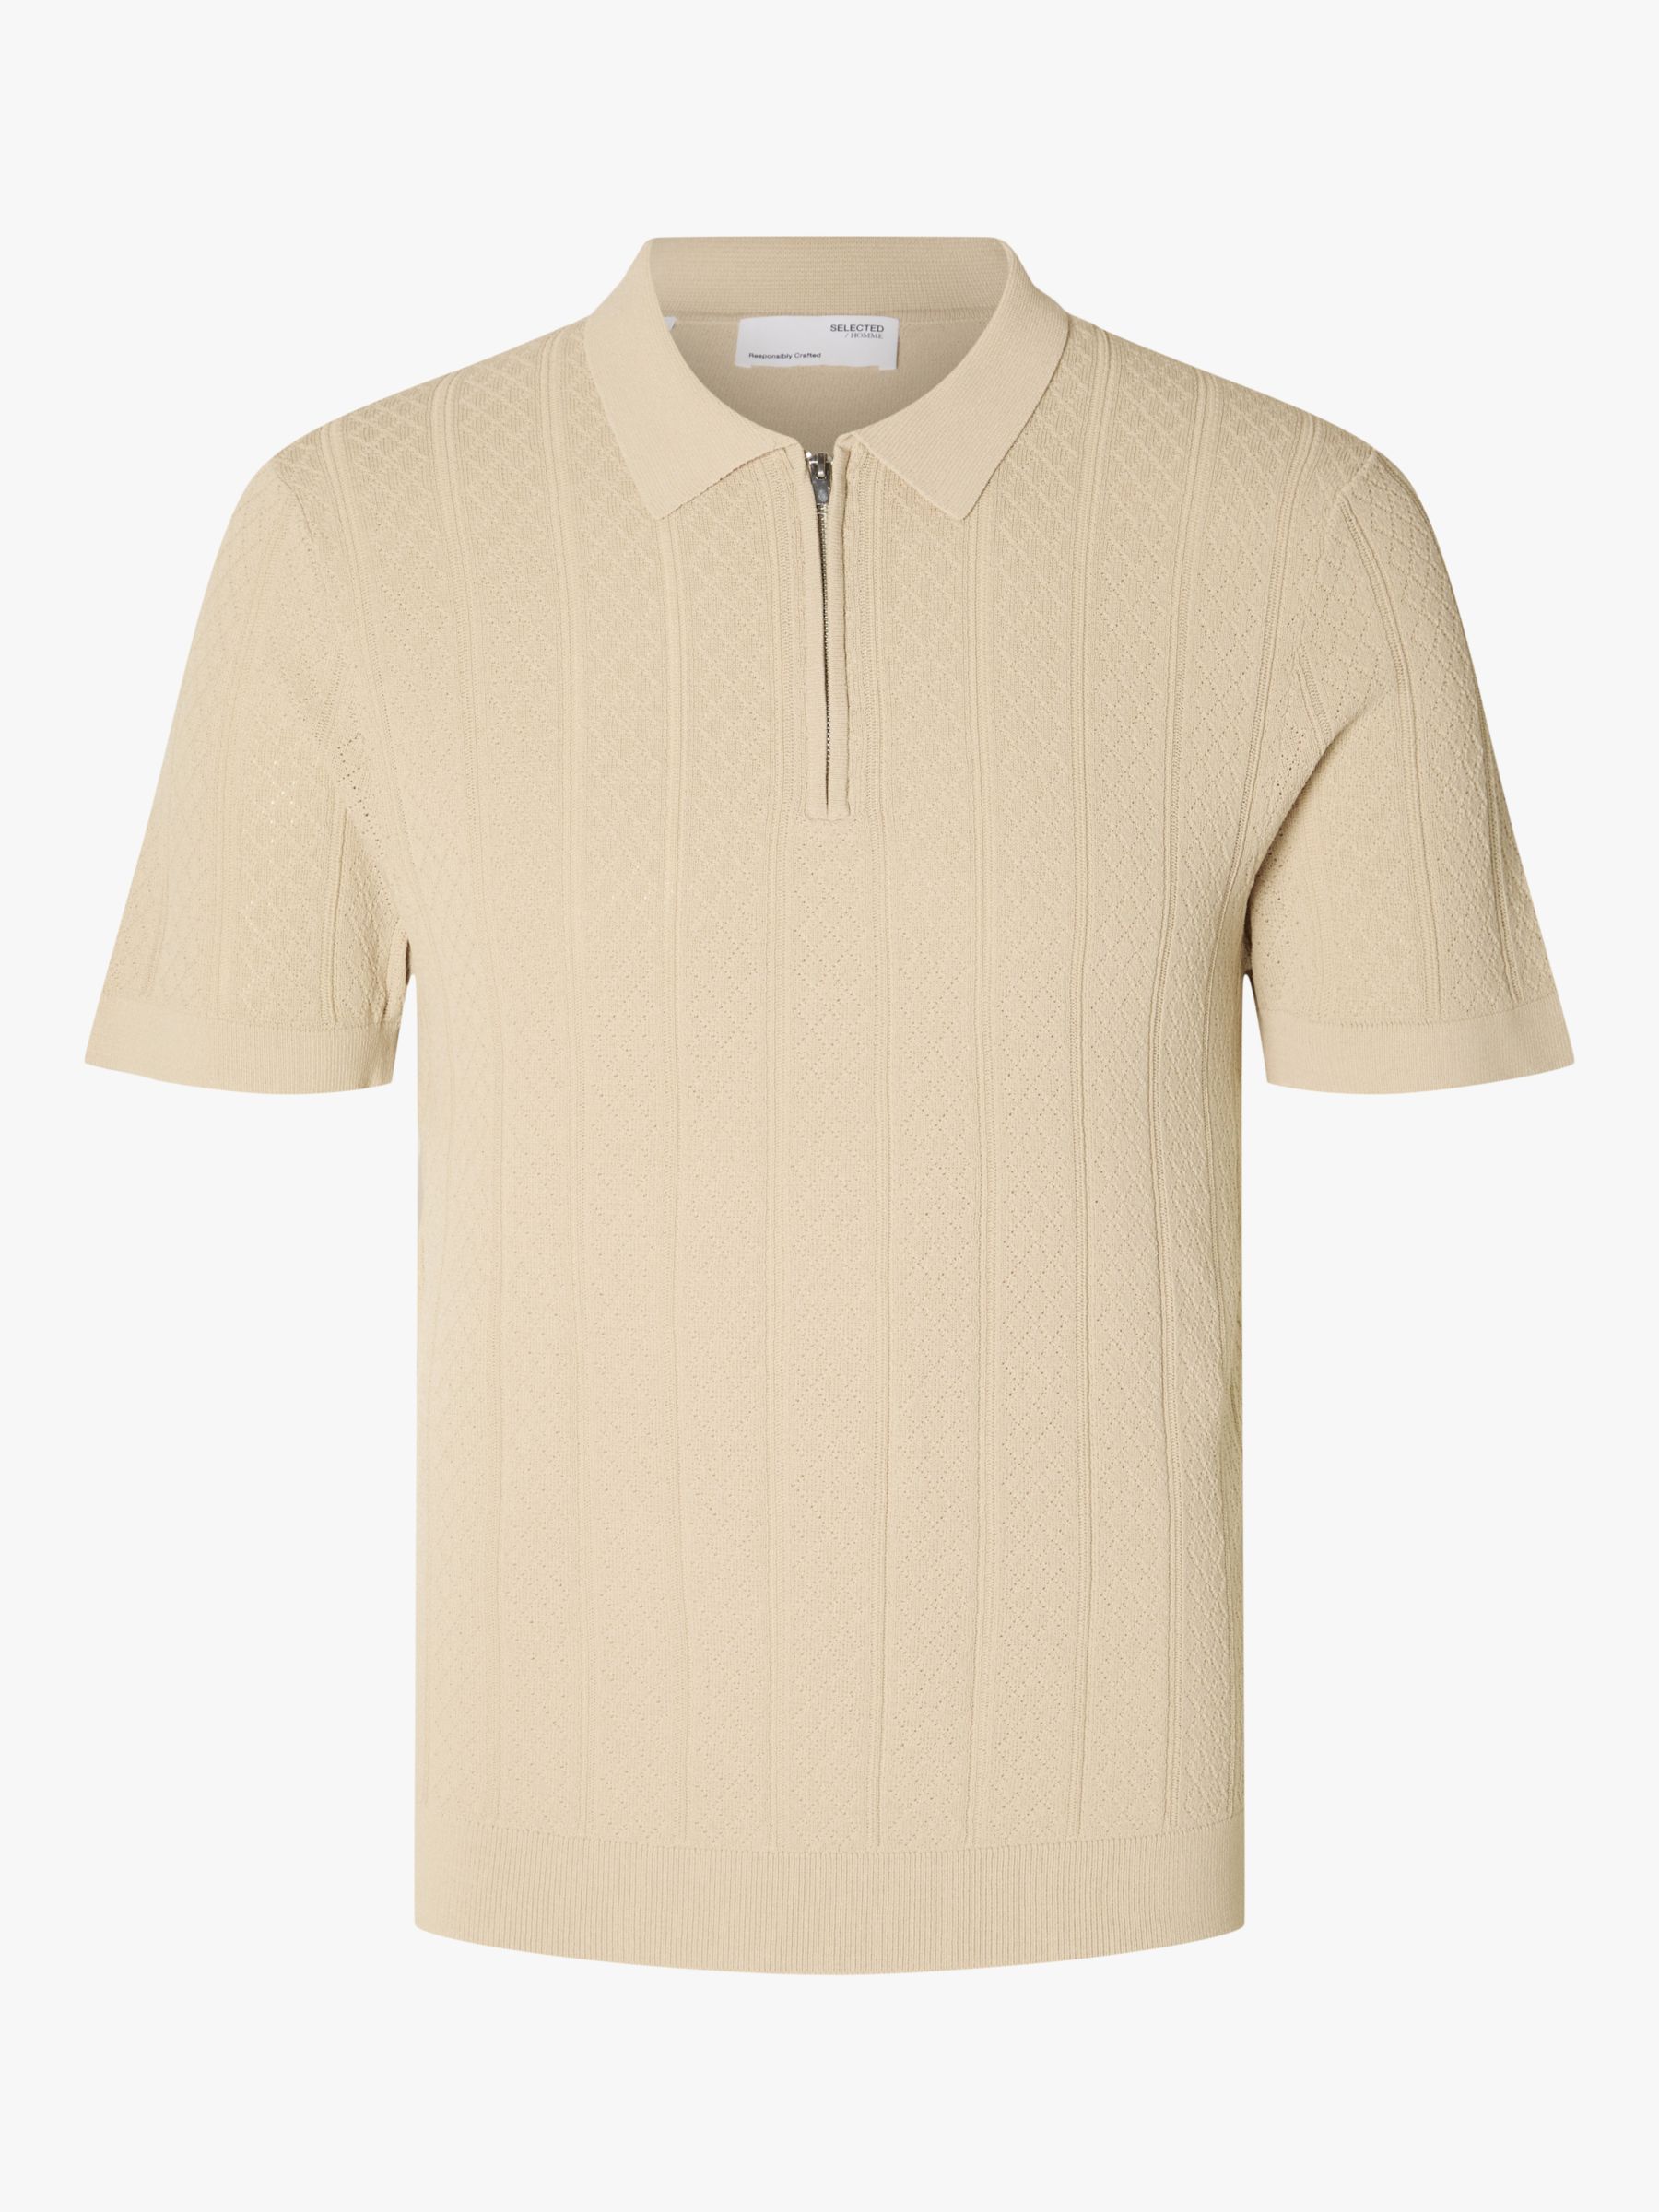 SELECTED HOMME Short Sleeve Knitted Polo Top, Oatmeal at John Lewis ...